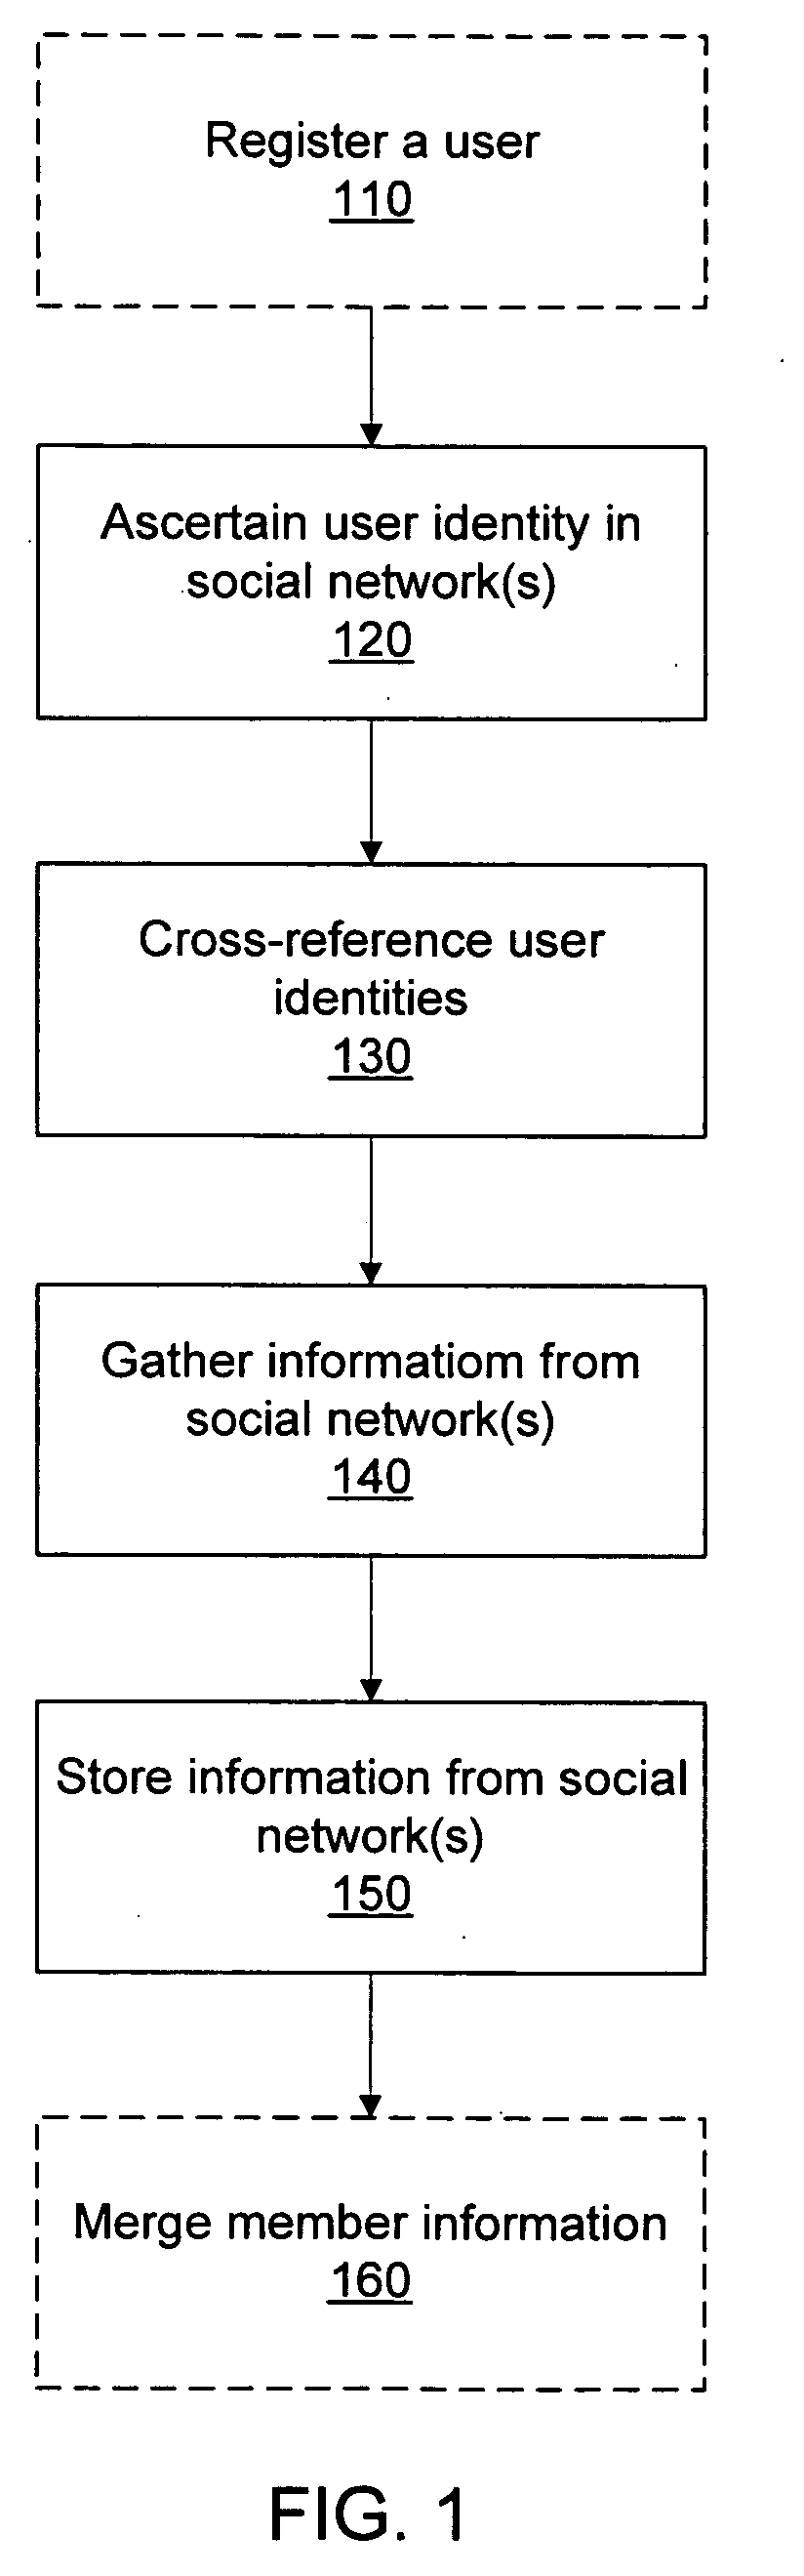 Communication mode and group integration for social networks